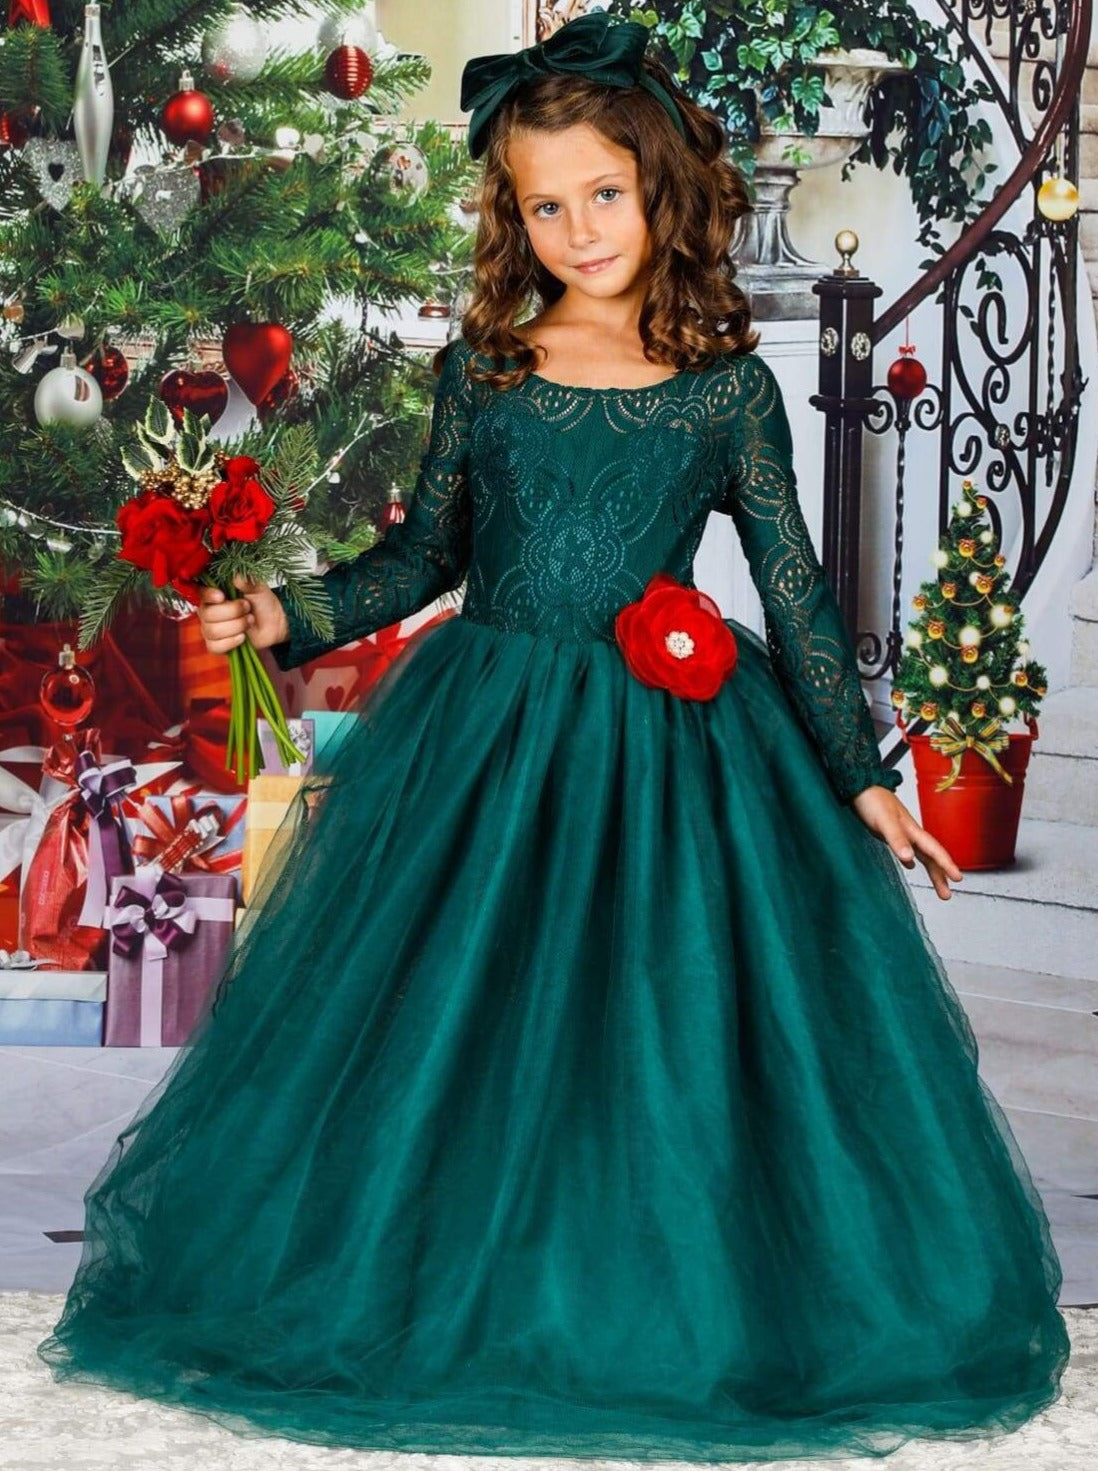 Girls Winter Formal Dress | Lace Bodice Holiday Gown | Mia Belle Girls